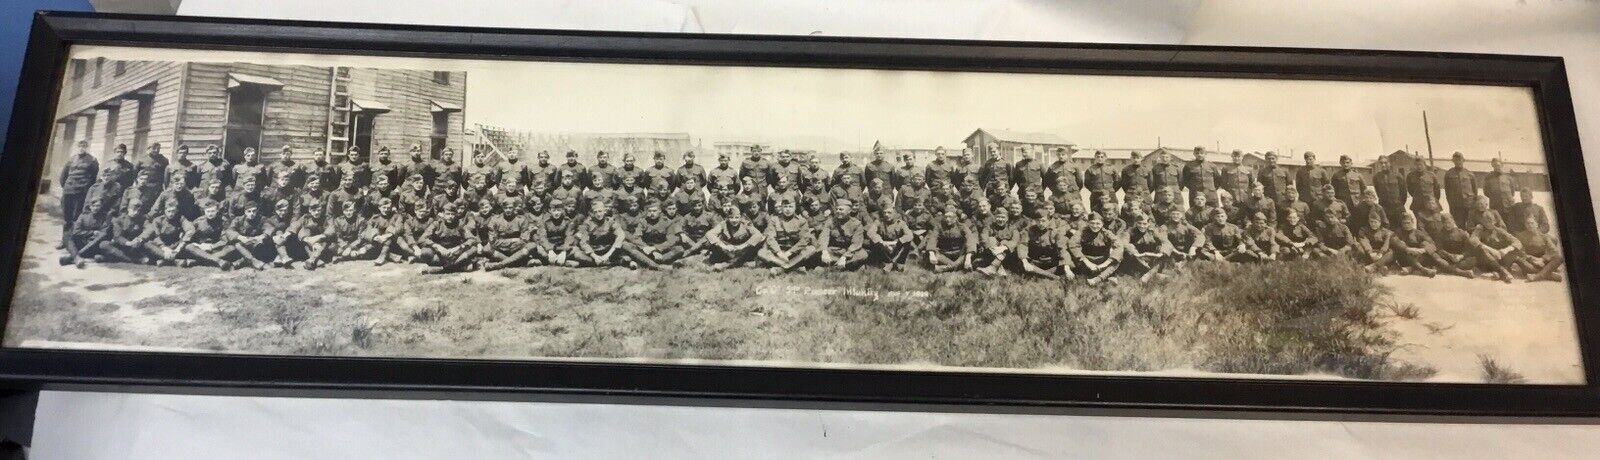 WW1 Antique 1919 Army 59th Pioneer Infantry Panoramic Photograph August 4, 1919